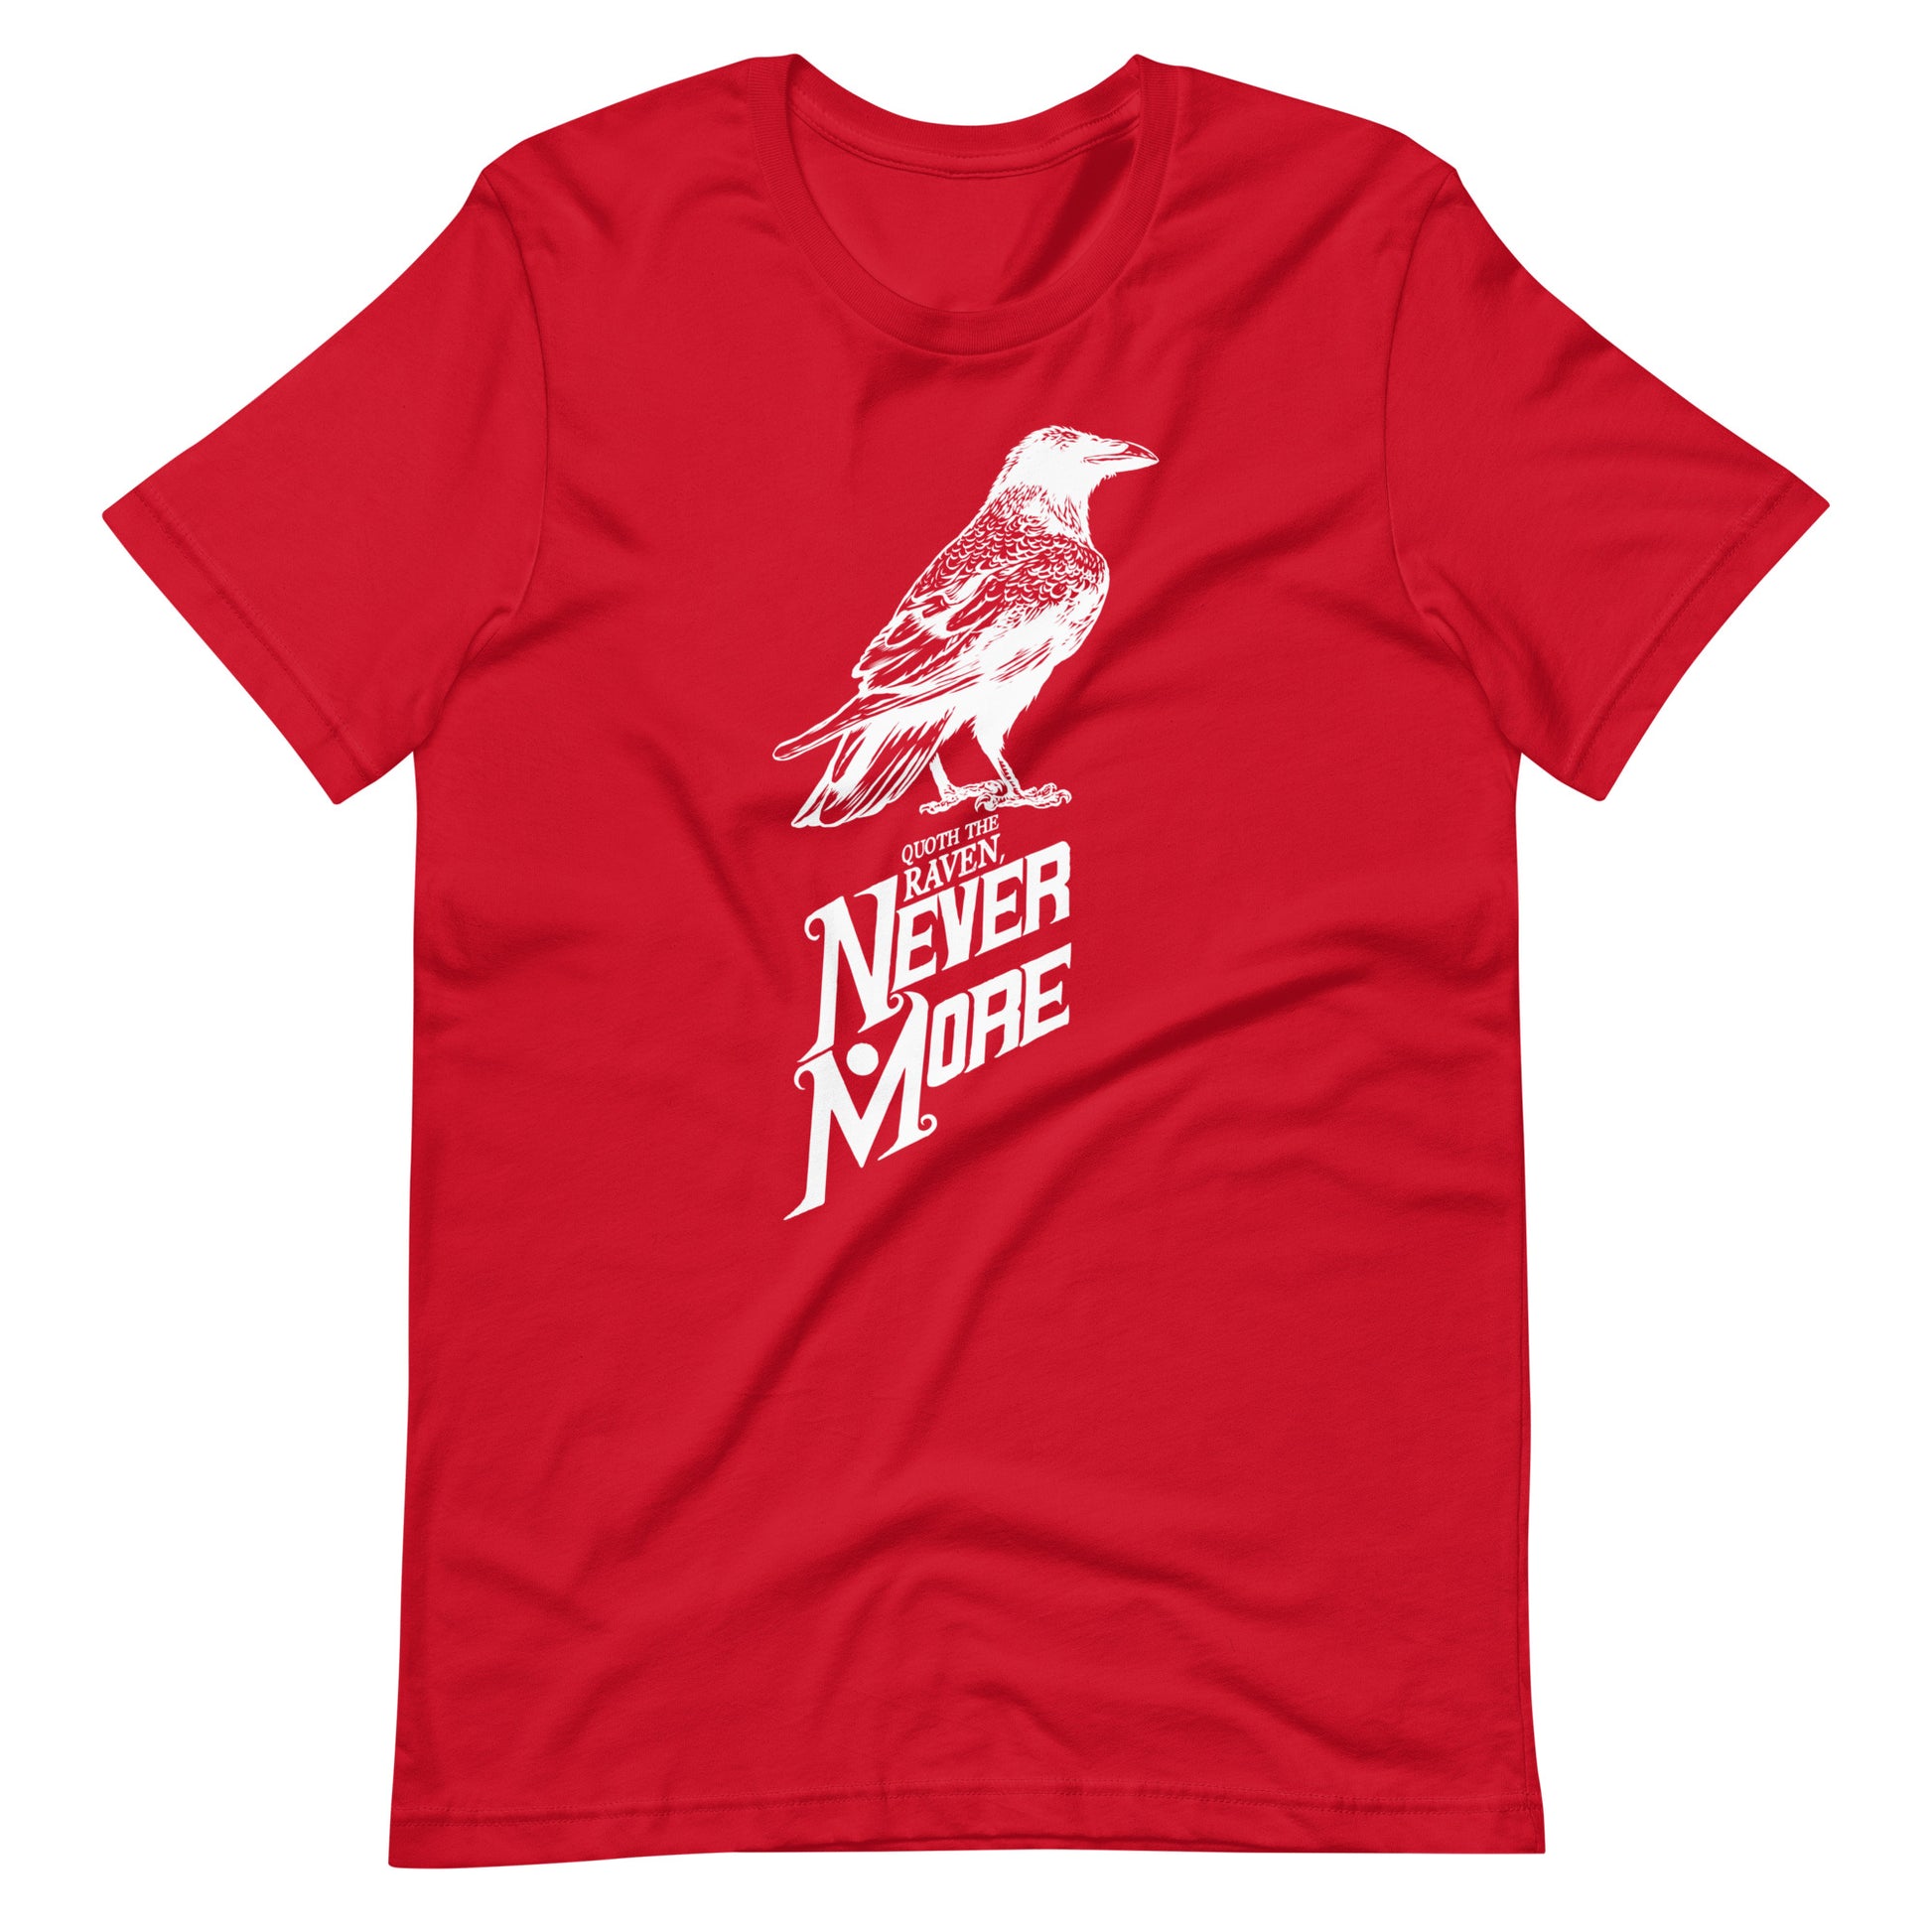 Quoth the Raven Nevermore - Men's t-shirt - Red Front